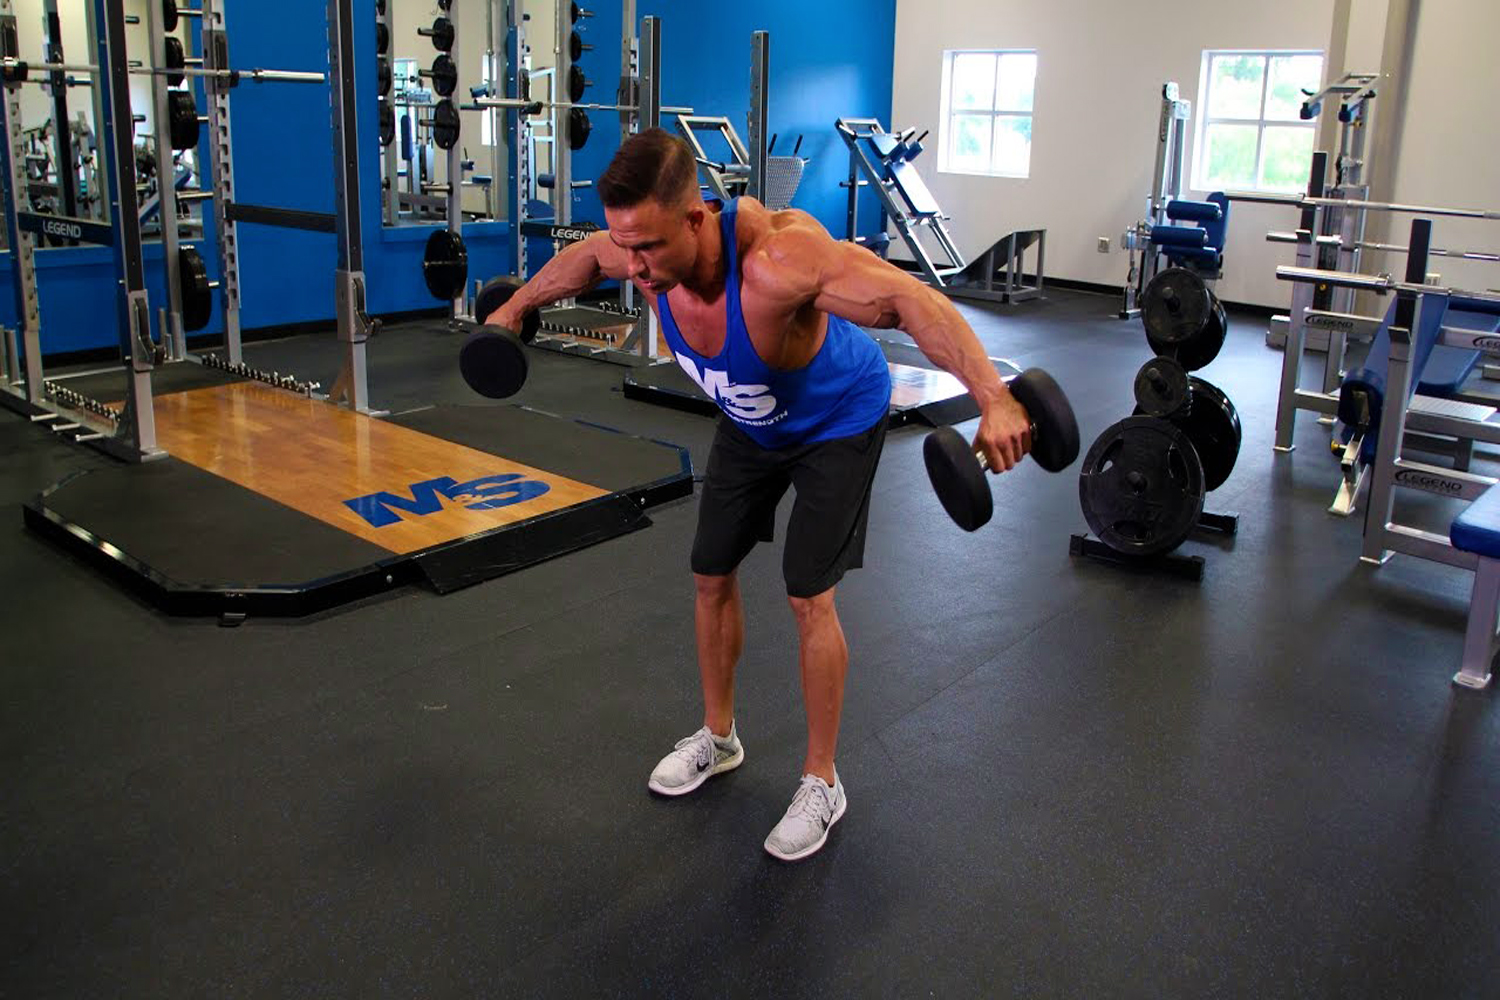 Man trying out a Bent-Over Reverse Fly with a dumbbell in each hand